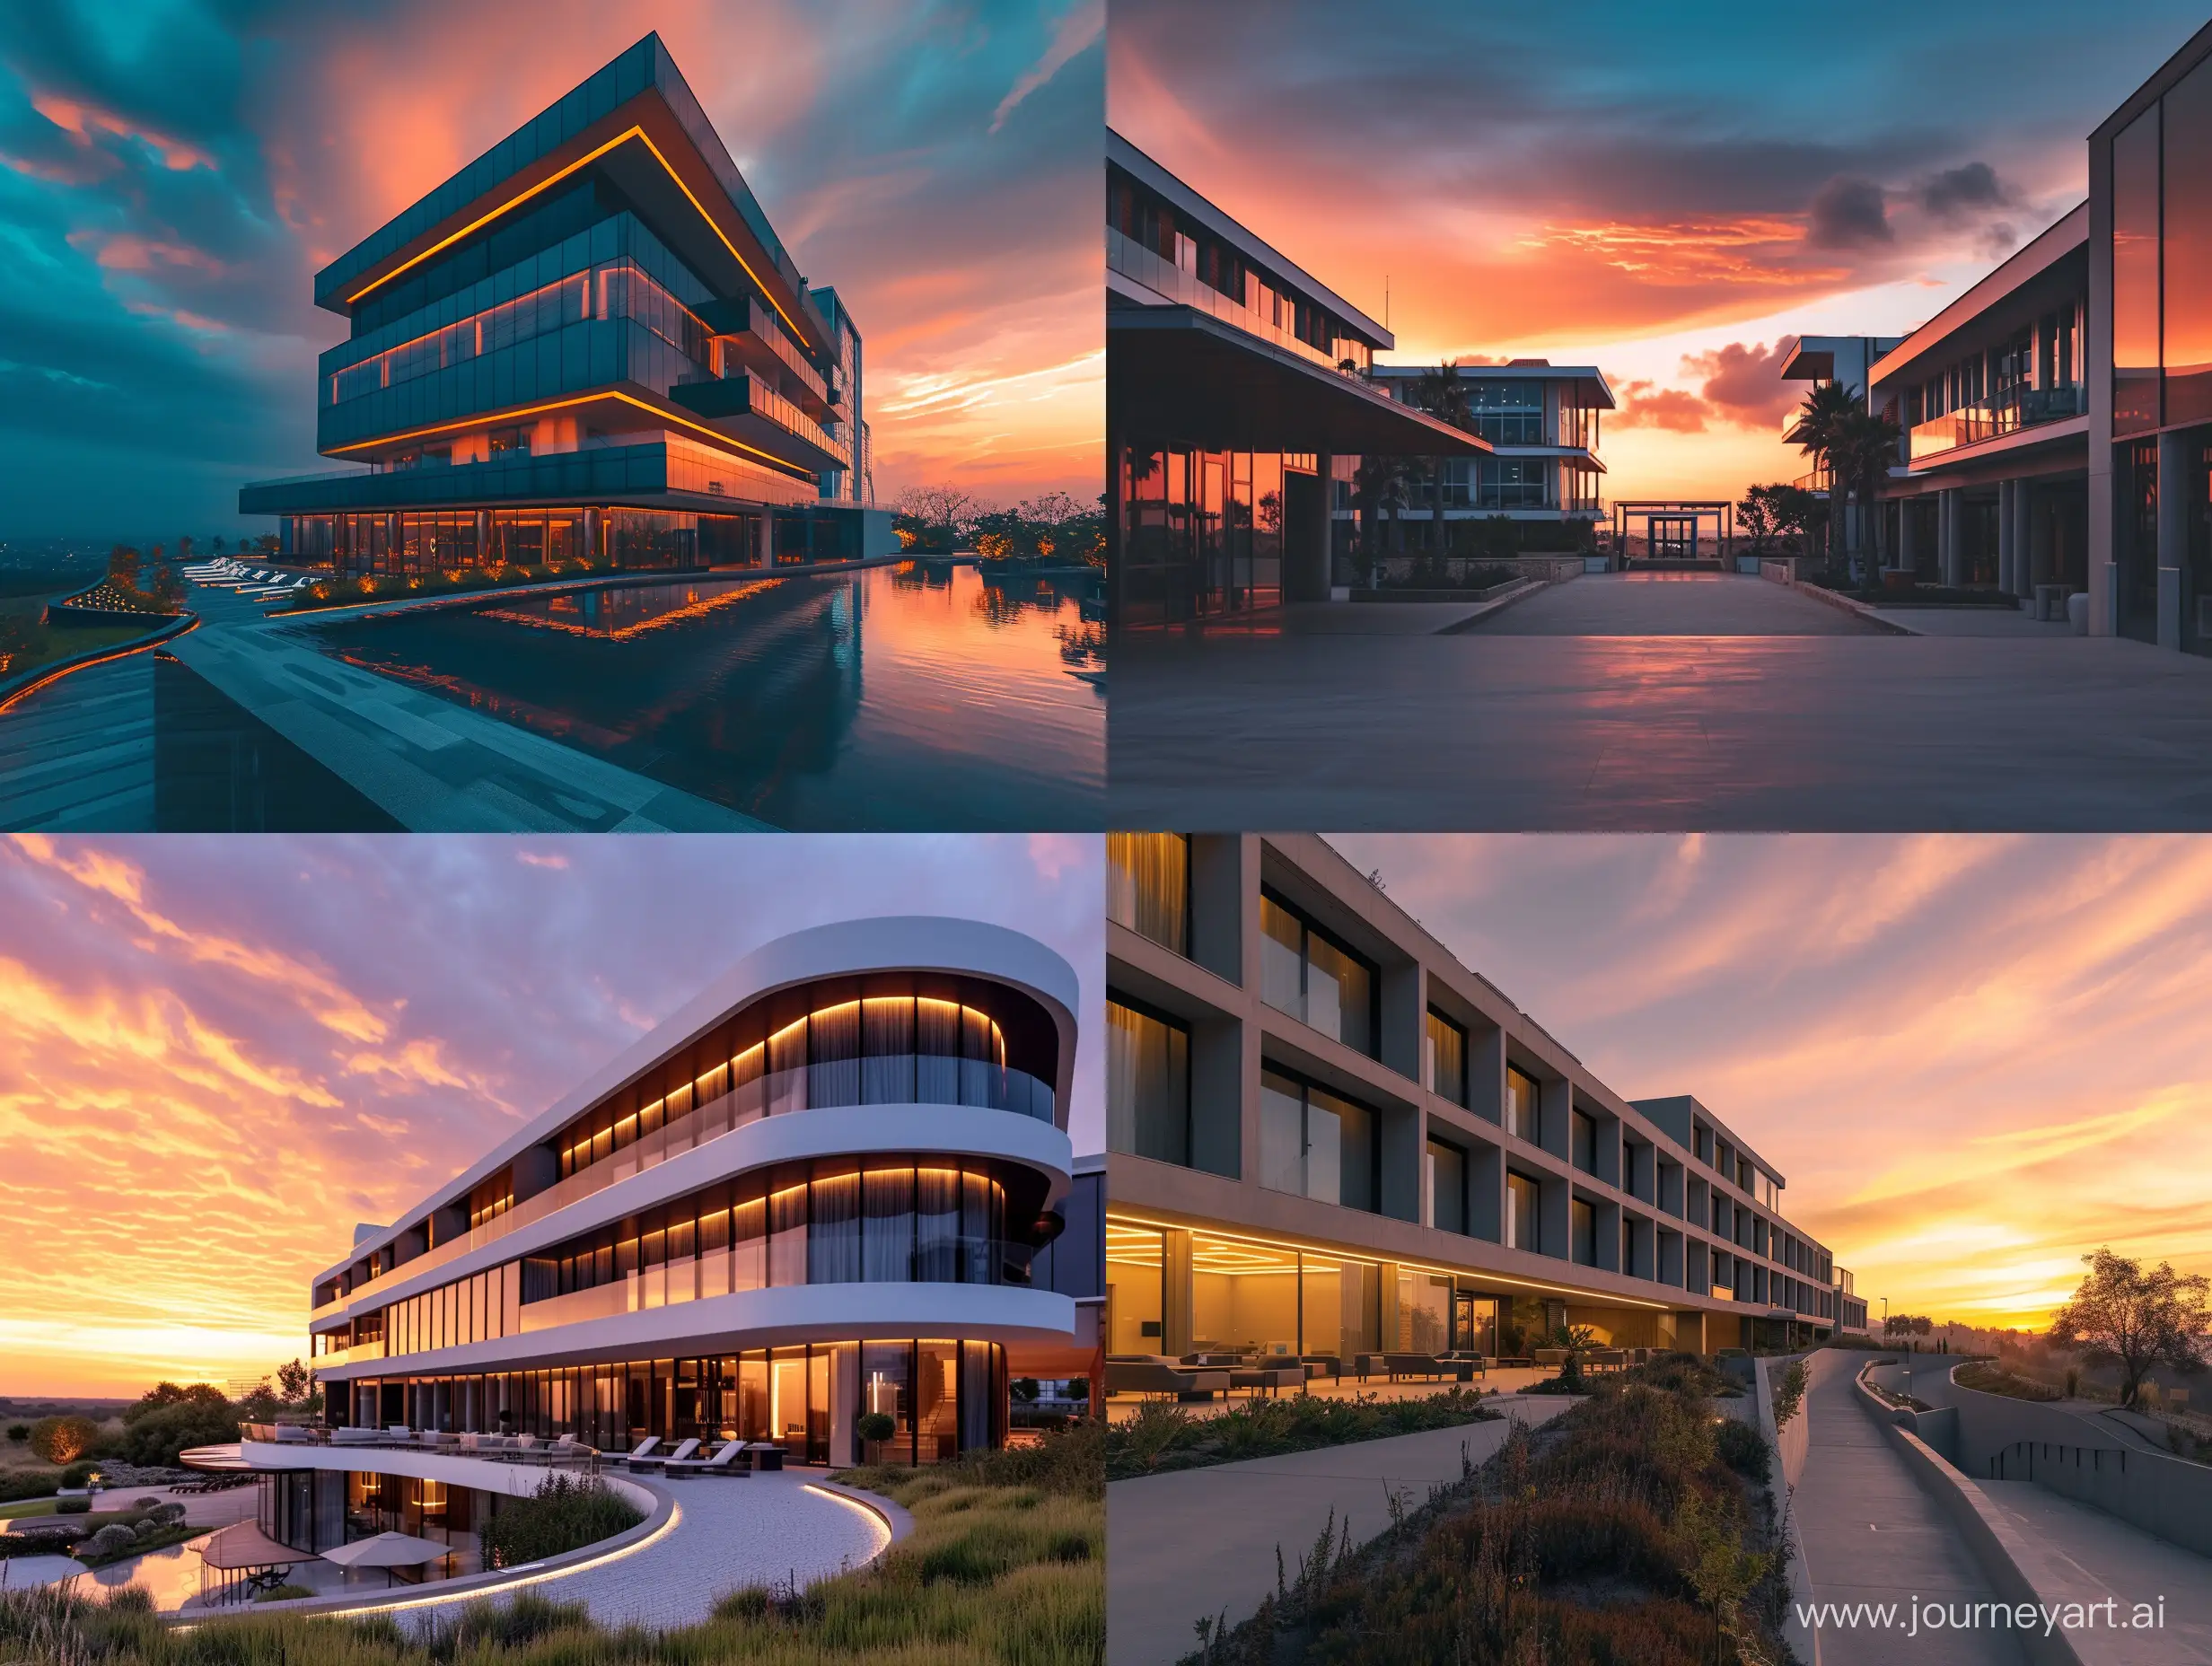 A cinematic photo of a modern hotel at sunset